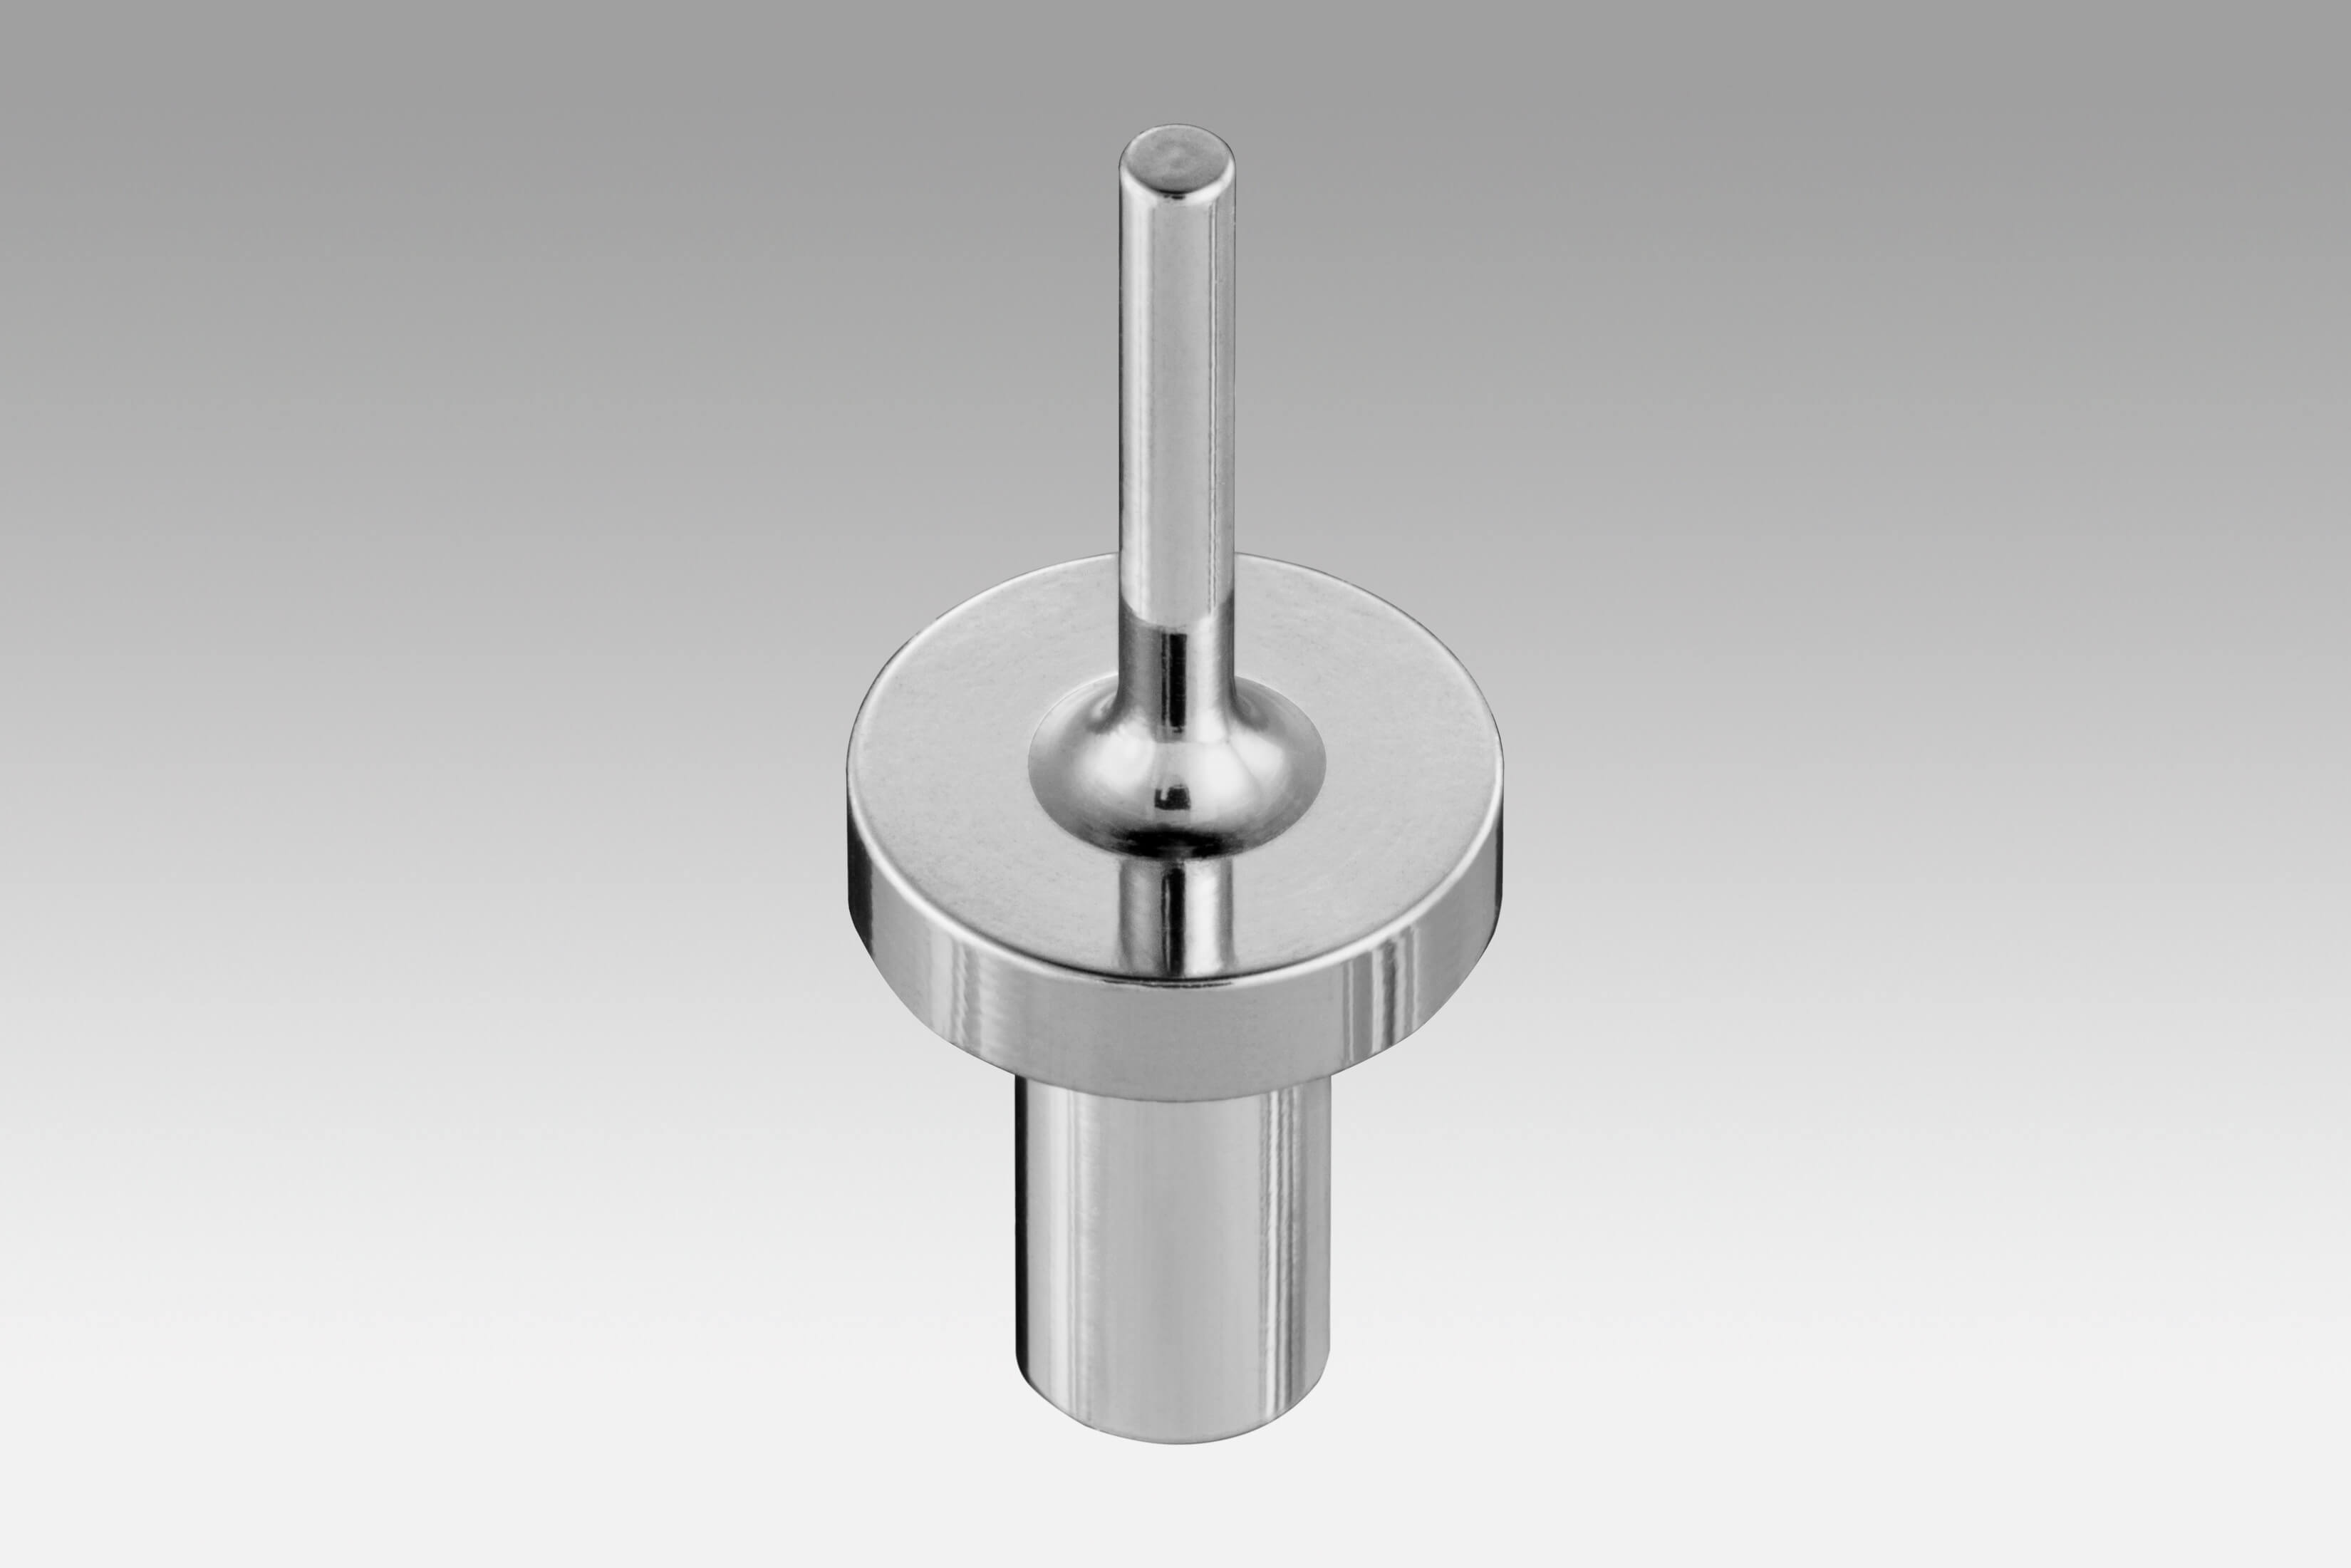 : Stepped shaft - Swiss supplier and manufacturer for medical micro-turning parts